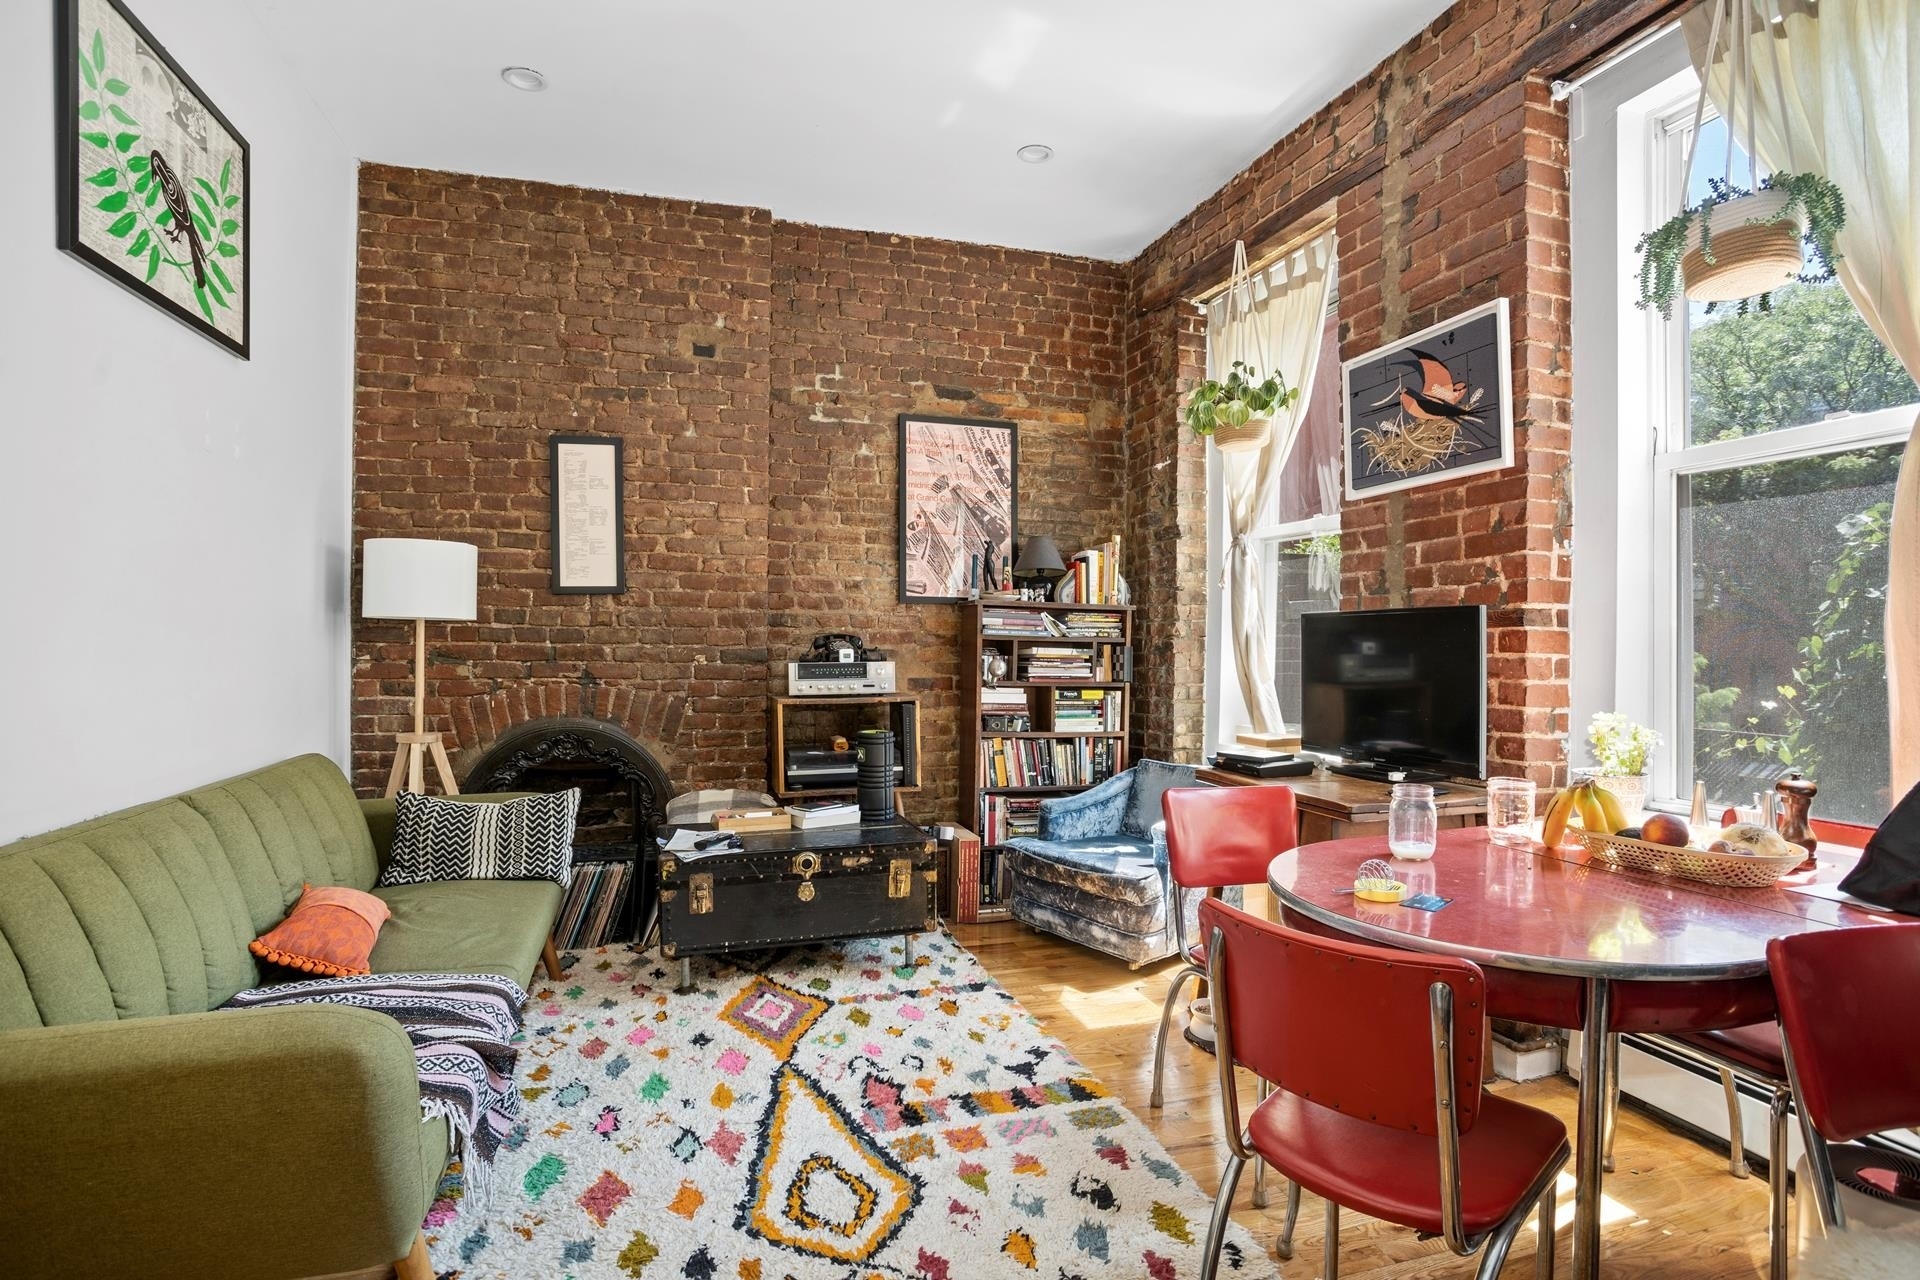 7. Single Family Townhouse for Sale at 85 CLAY ST, BLDG Greenpoint, Brooklyn, NY 11222